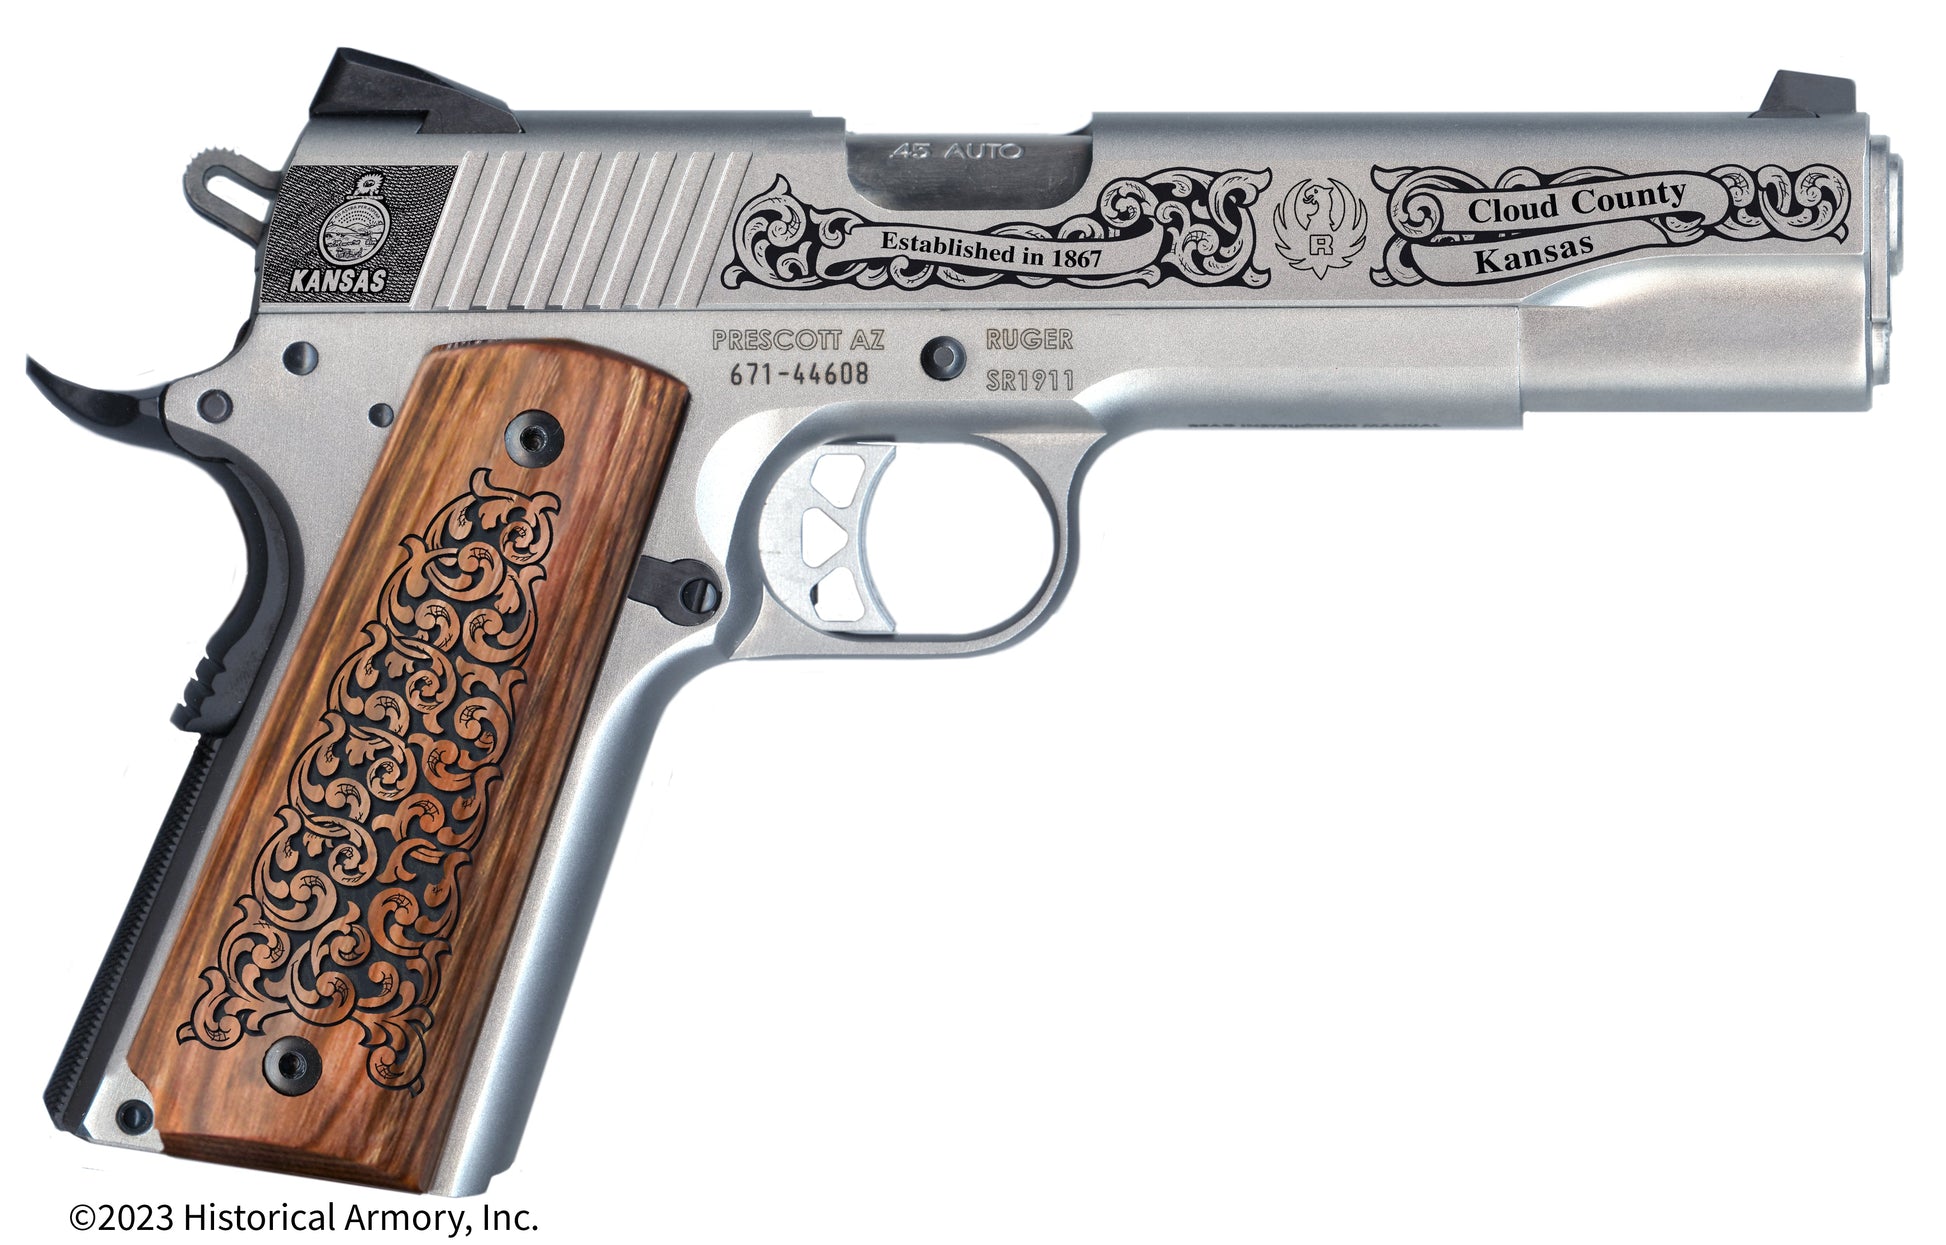 Cloud County Kansas Engraved .45 Auto Ruger 1911